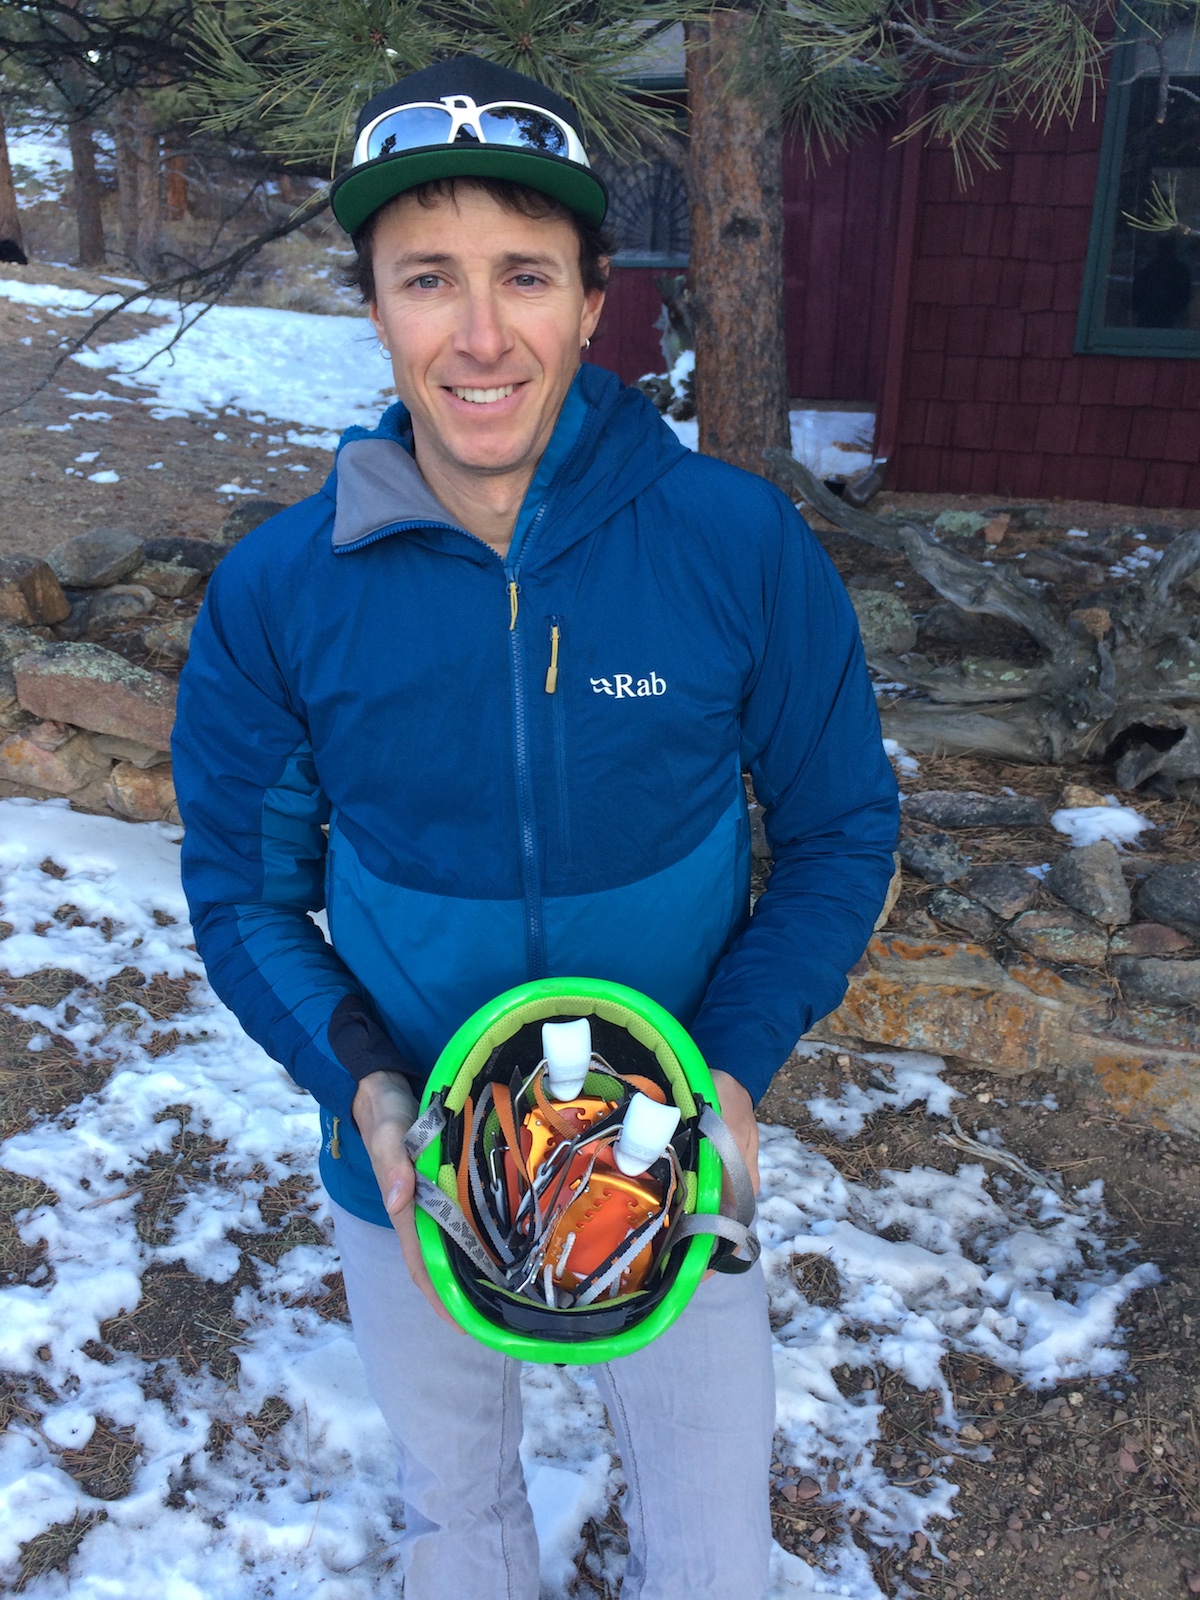 Mike Lewis shows how the Irvis Hybrid Crampons easily fit in a helmet. [Photo] Chris Wood